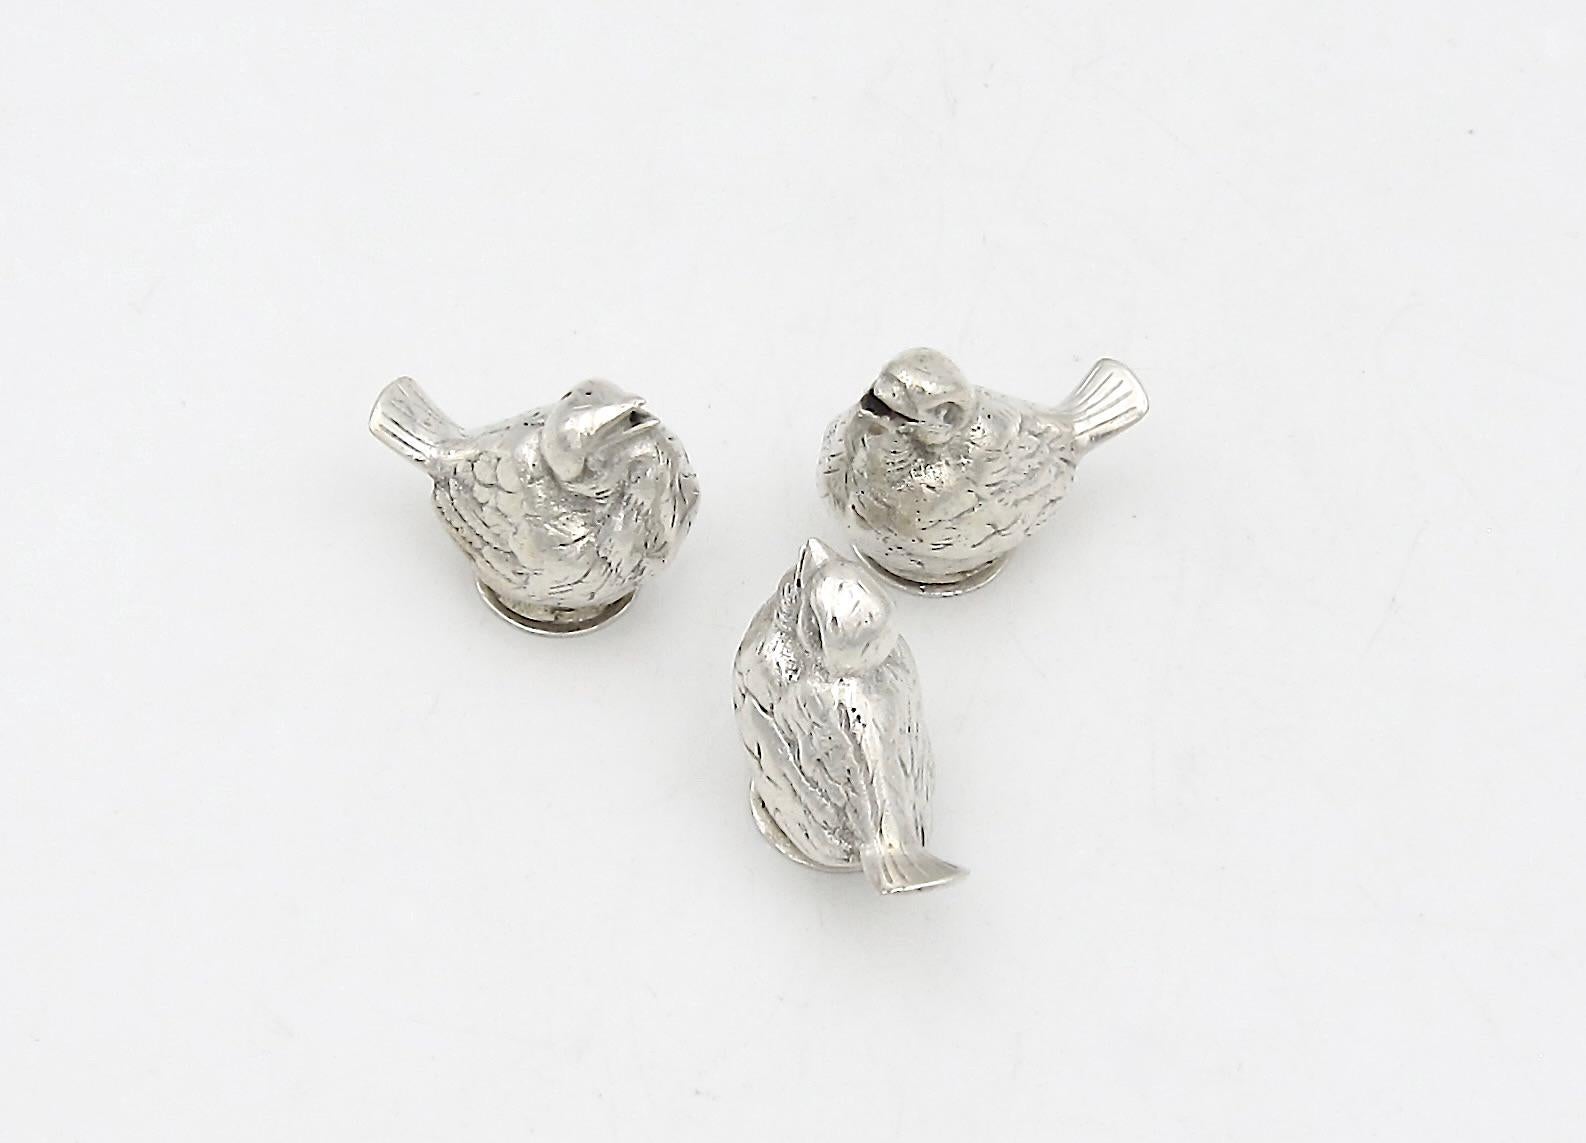 European Antique Continental Novelty Bird Pepperette Shakers in 900 Silver